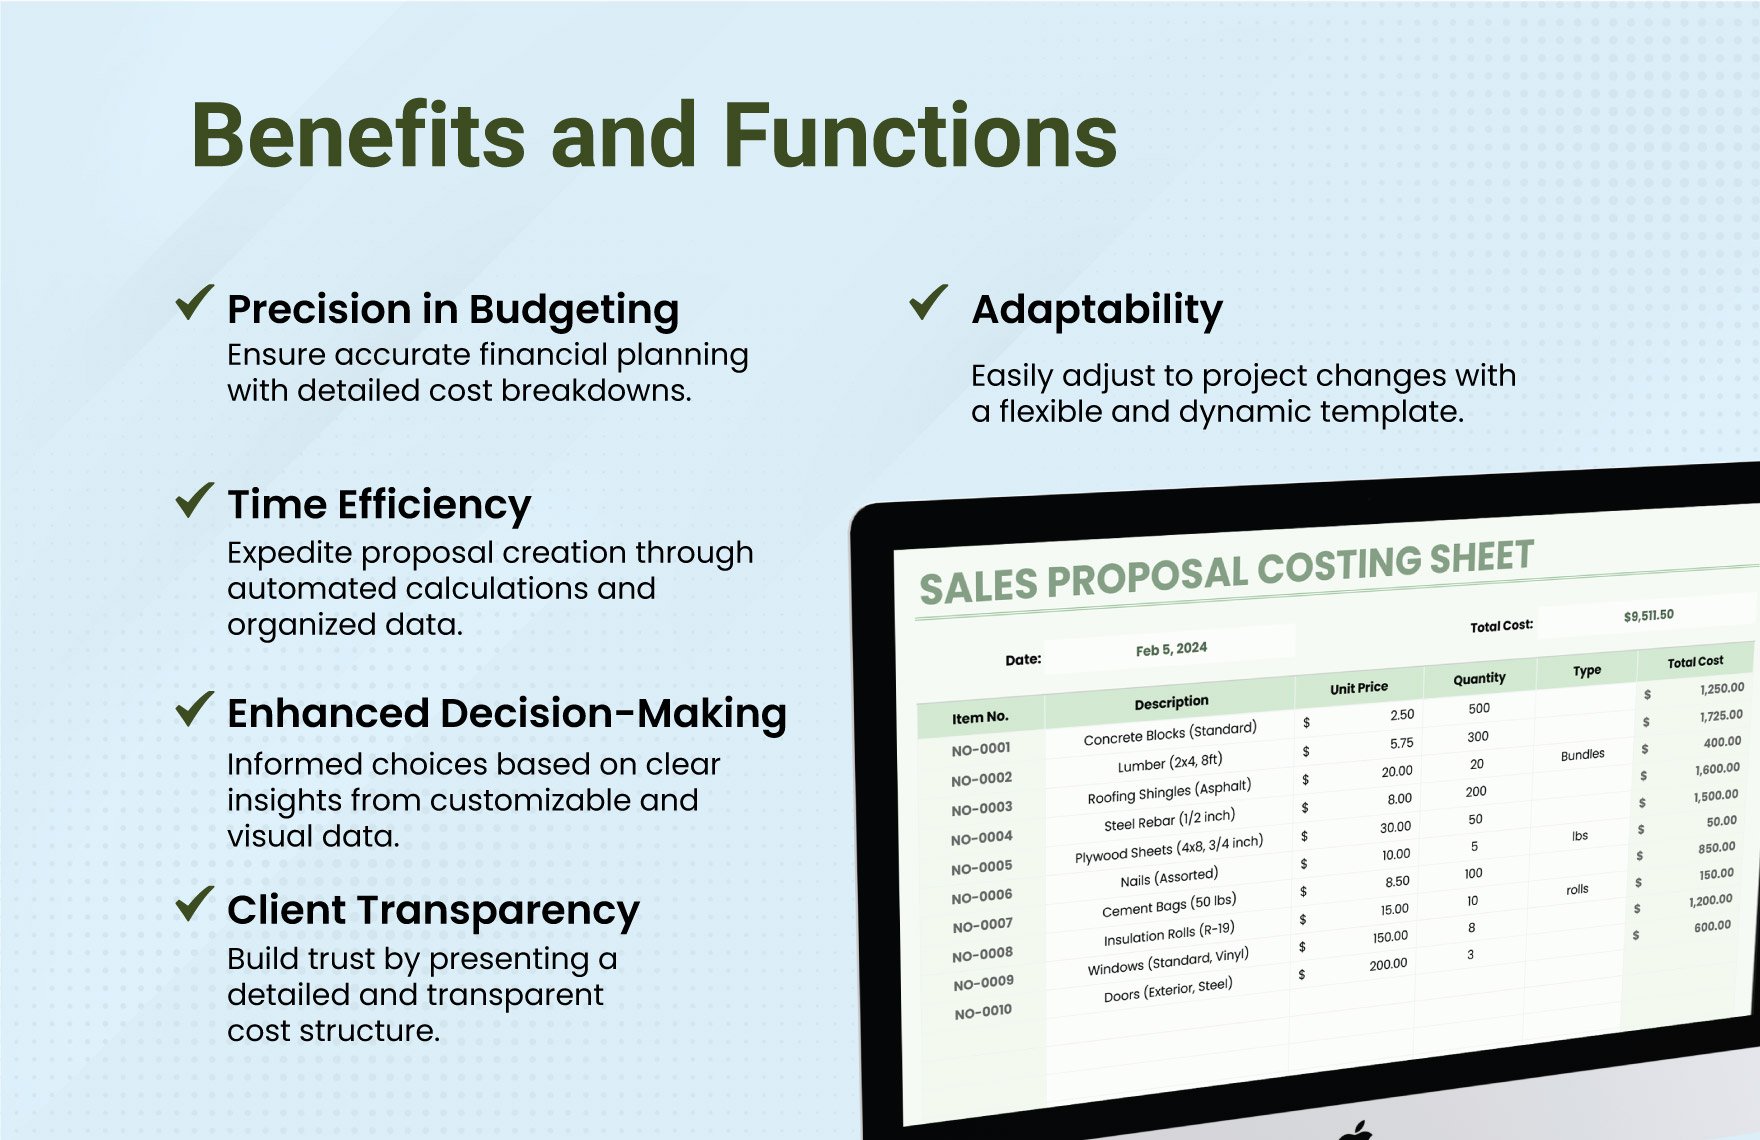 Sales Proposal Costing Sheet Template